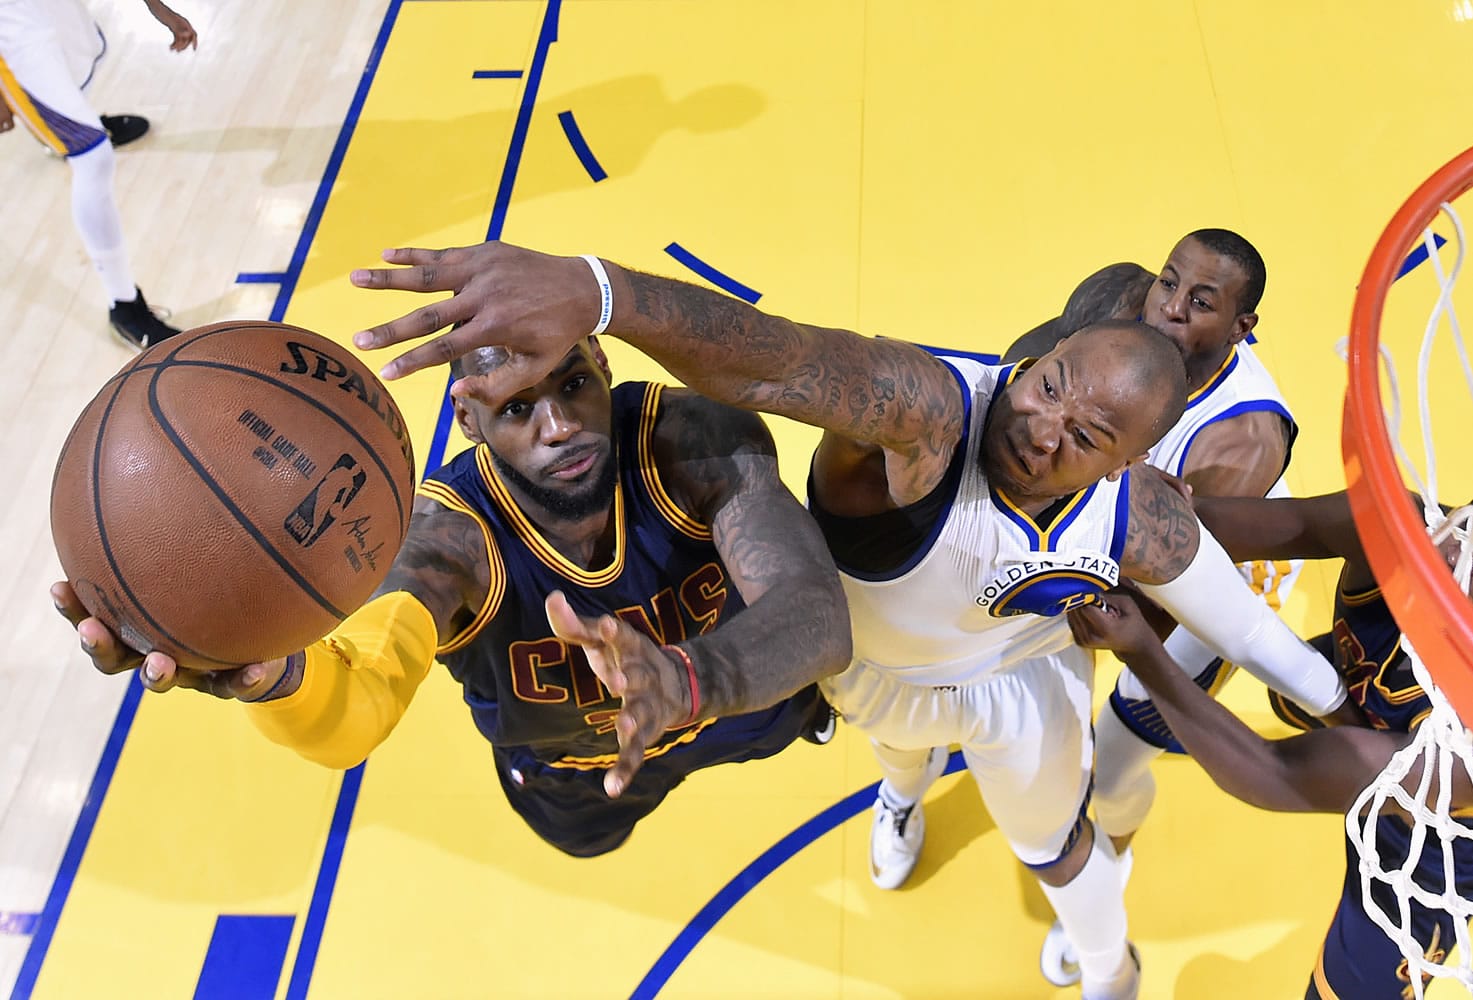 Cleveland Cavaliers forward LeBron James, left, shoots against Golden State Warriors forward Marreese Speights during Game 2 of the NBA Finals on June 7 in Oakland, Calif. There are several options for sports fans without cable to watch live games.